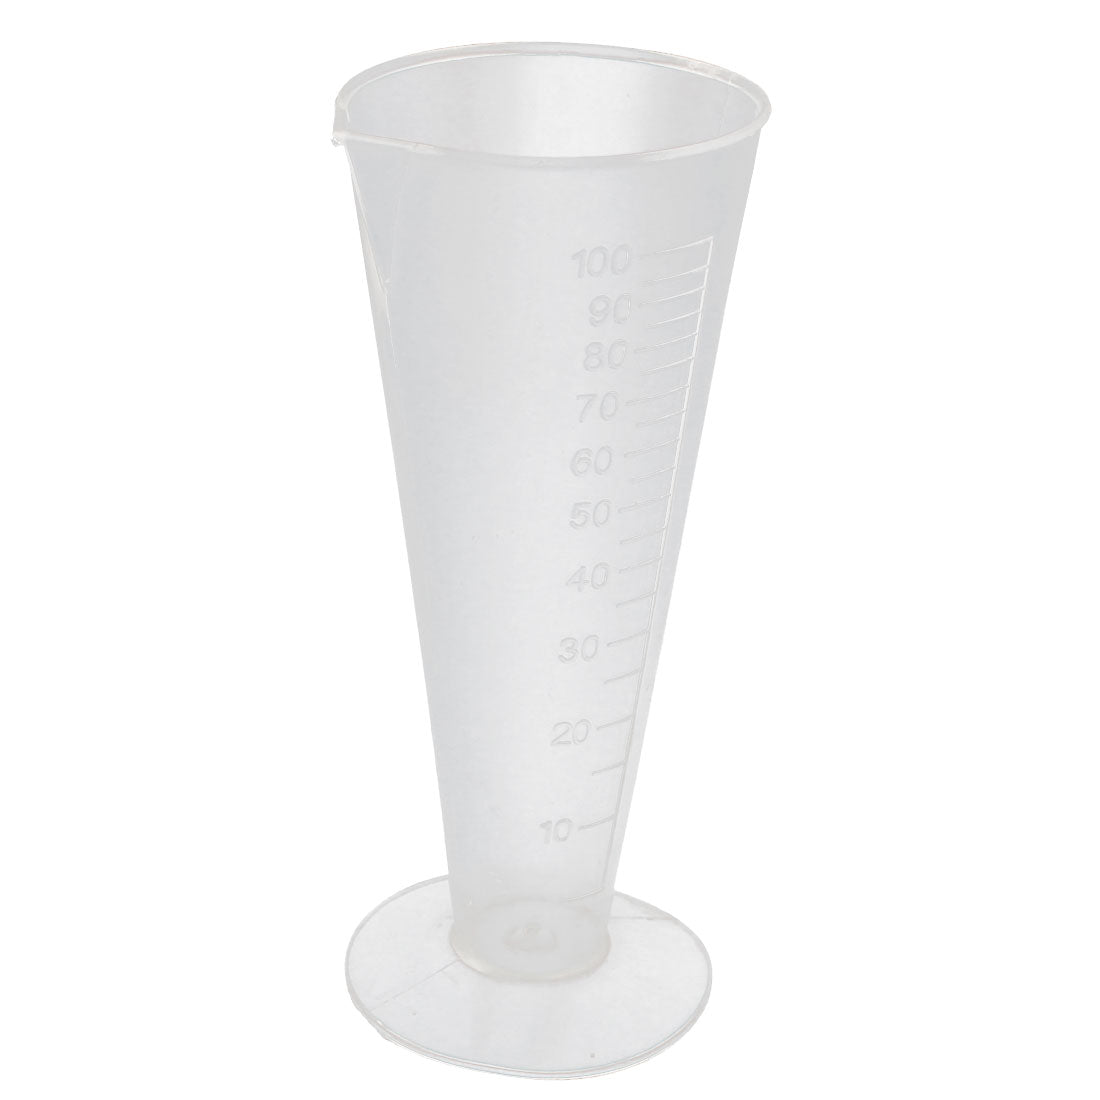 uxcell Uxcell 100ML Laboratory Experiment Tool Graduated Volume Measuring Cup Beaker